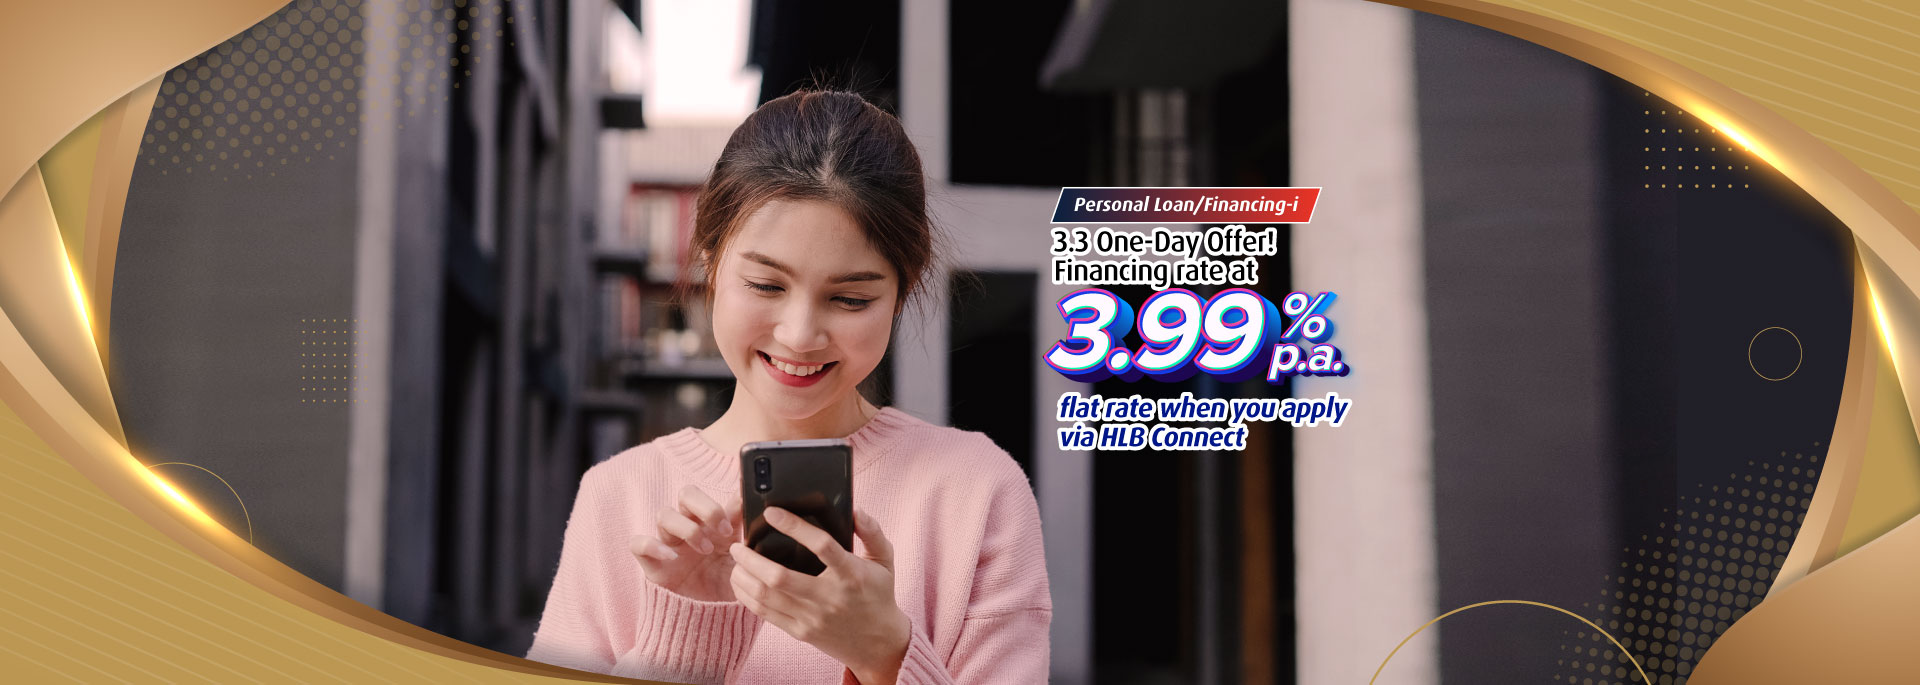 3.3 One-day promo at 3.99% p.a.